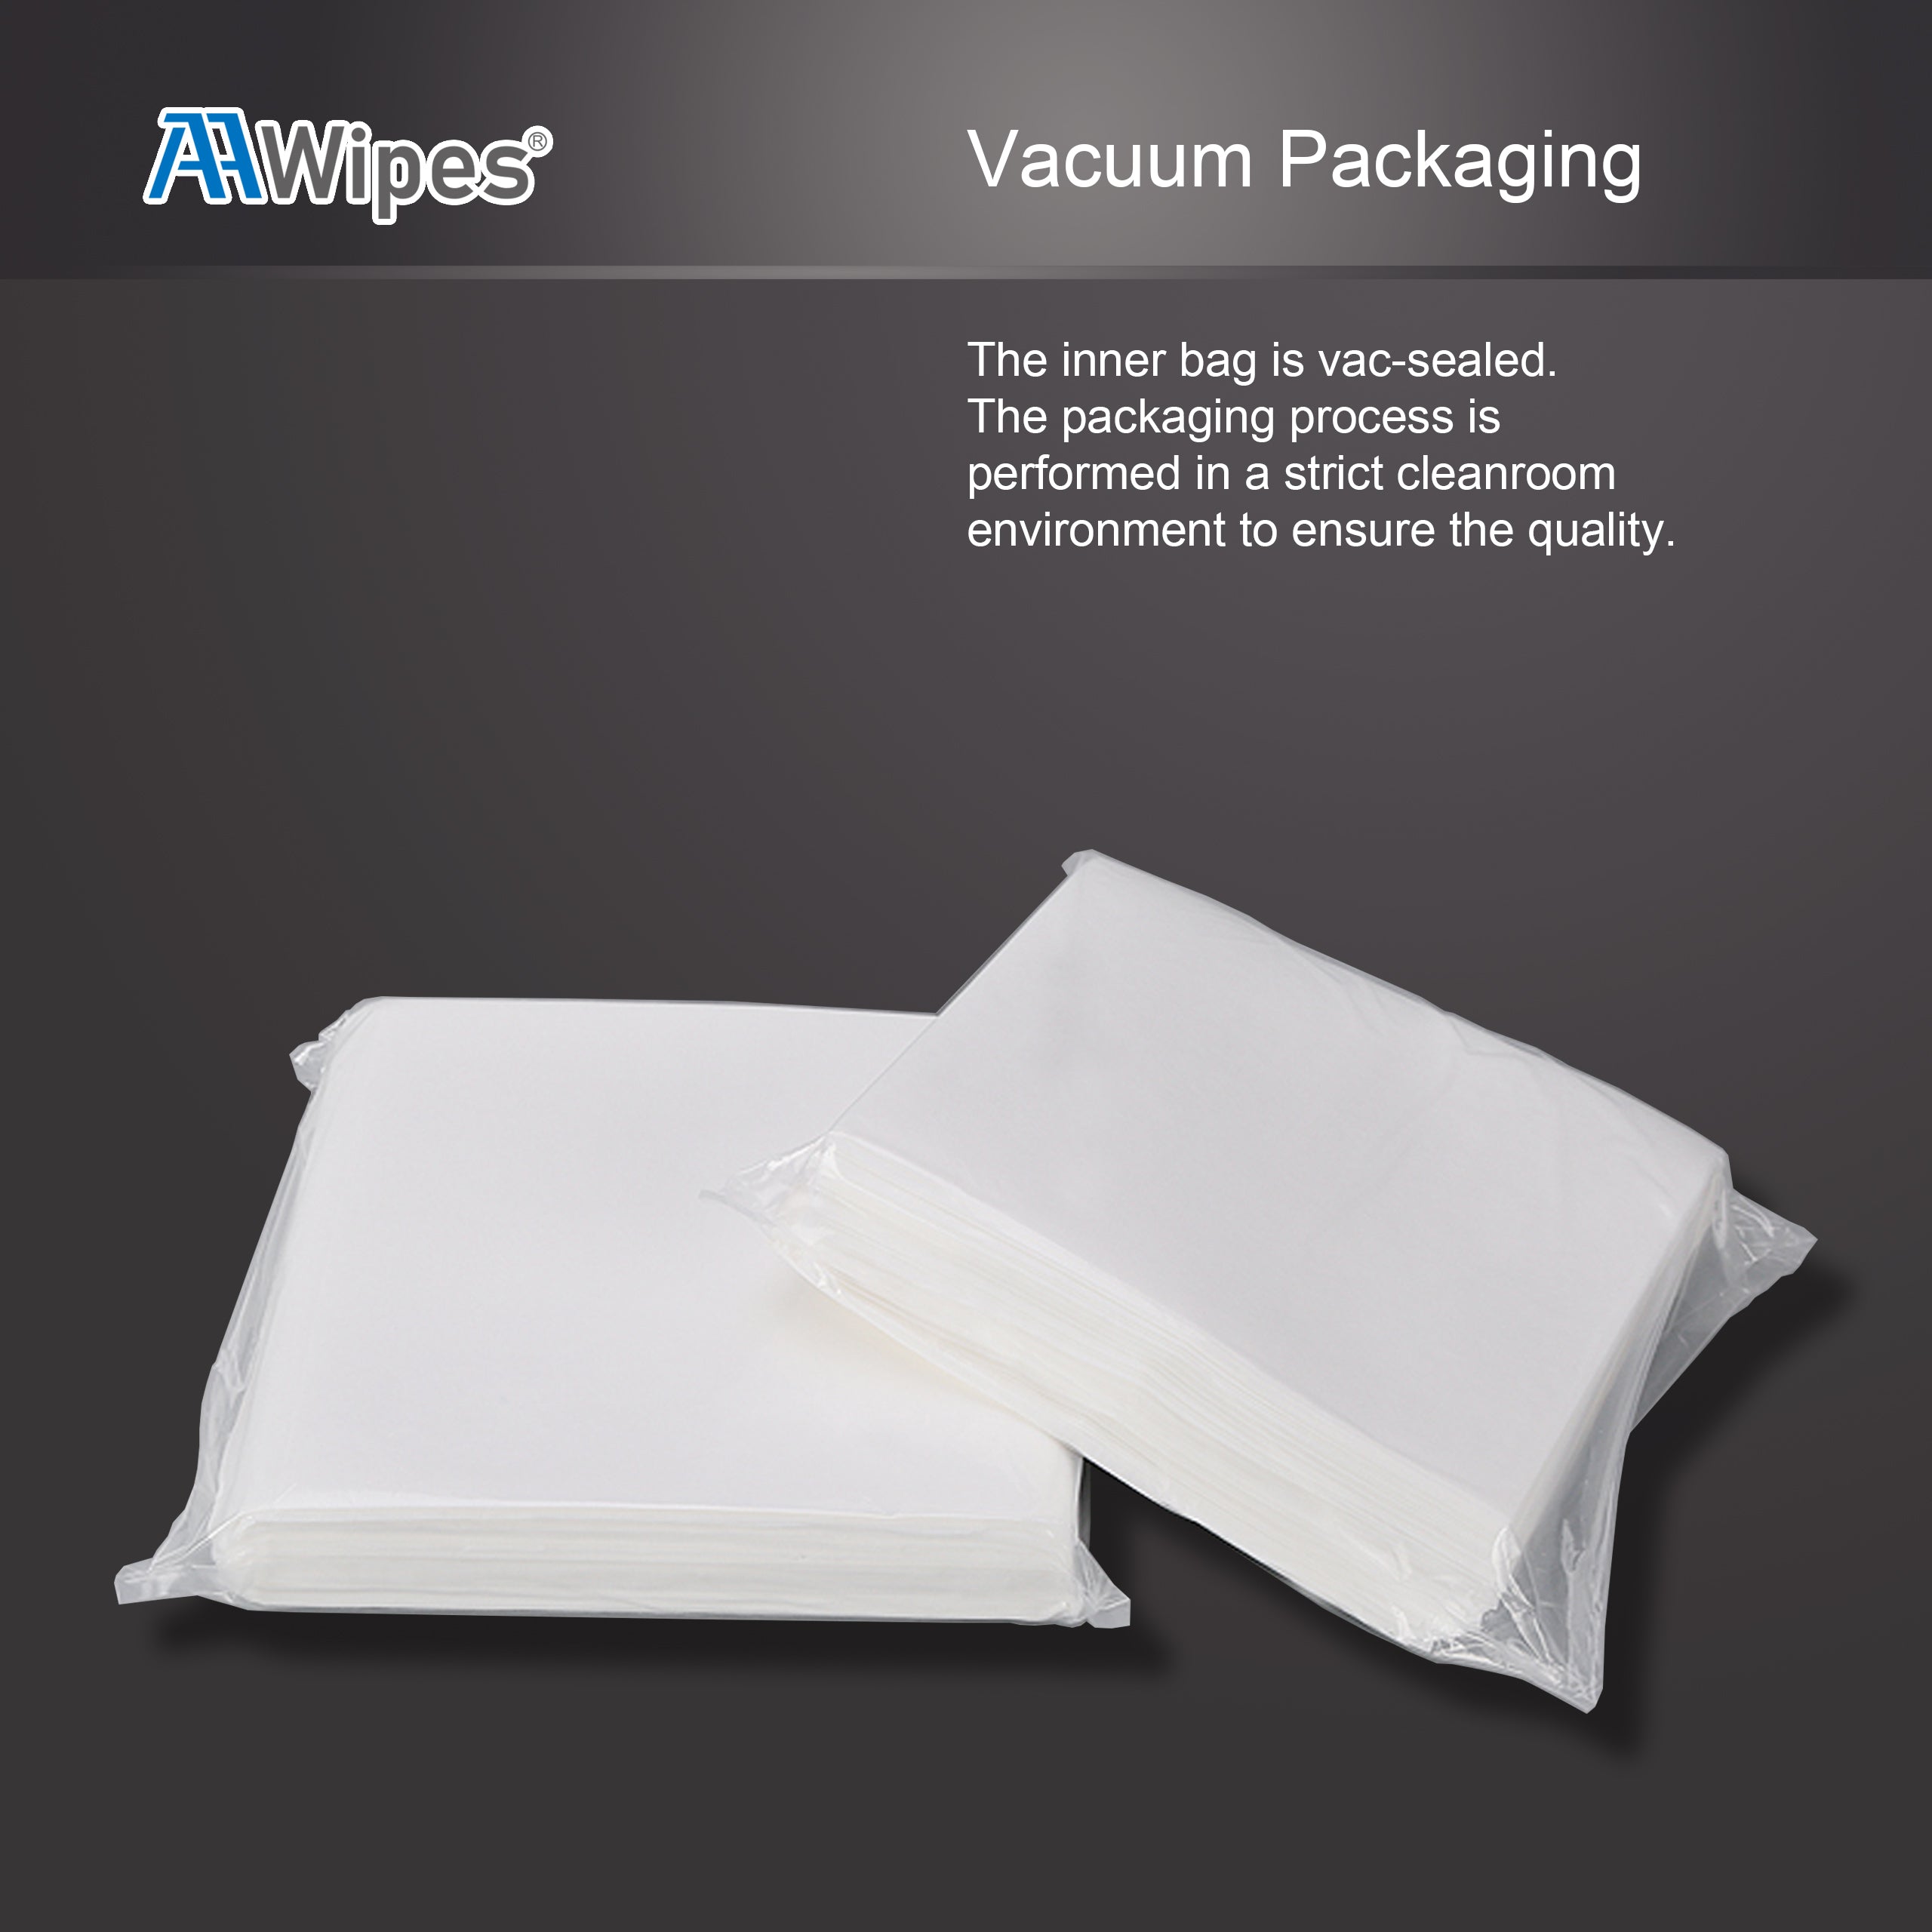 AAwipes Nonwoven Wipes: 4"x4" Cellulose/Polyester. 16,800 wipes/box in 28 bags (No. NW06804).